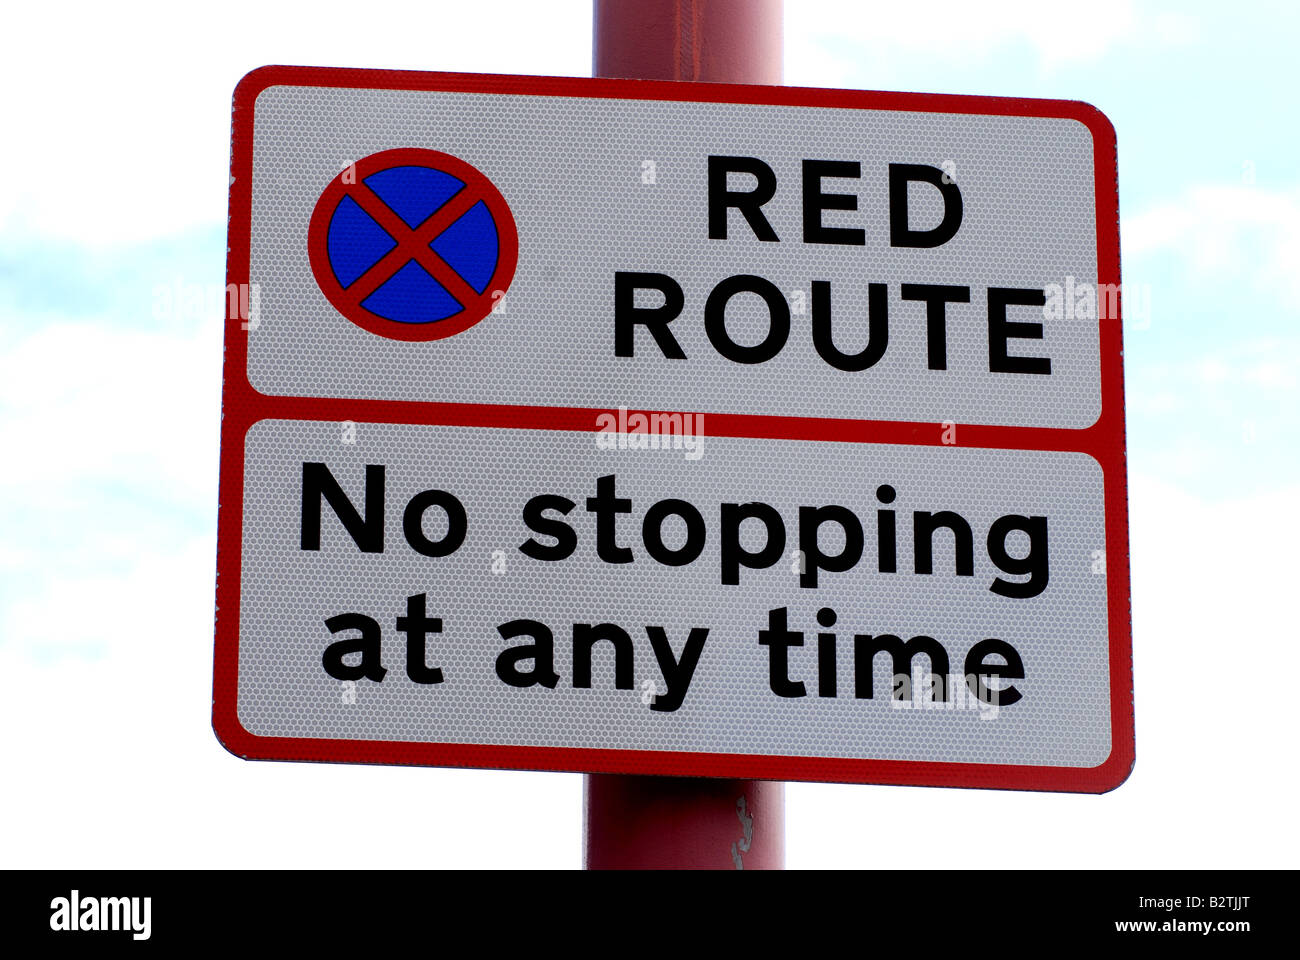 Red Route No stopping at any time sign, UK Stock Photo